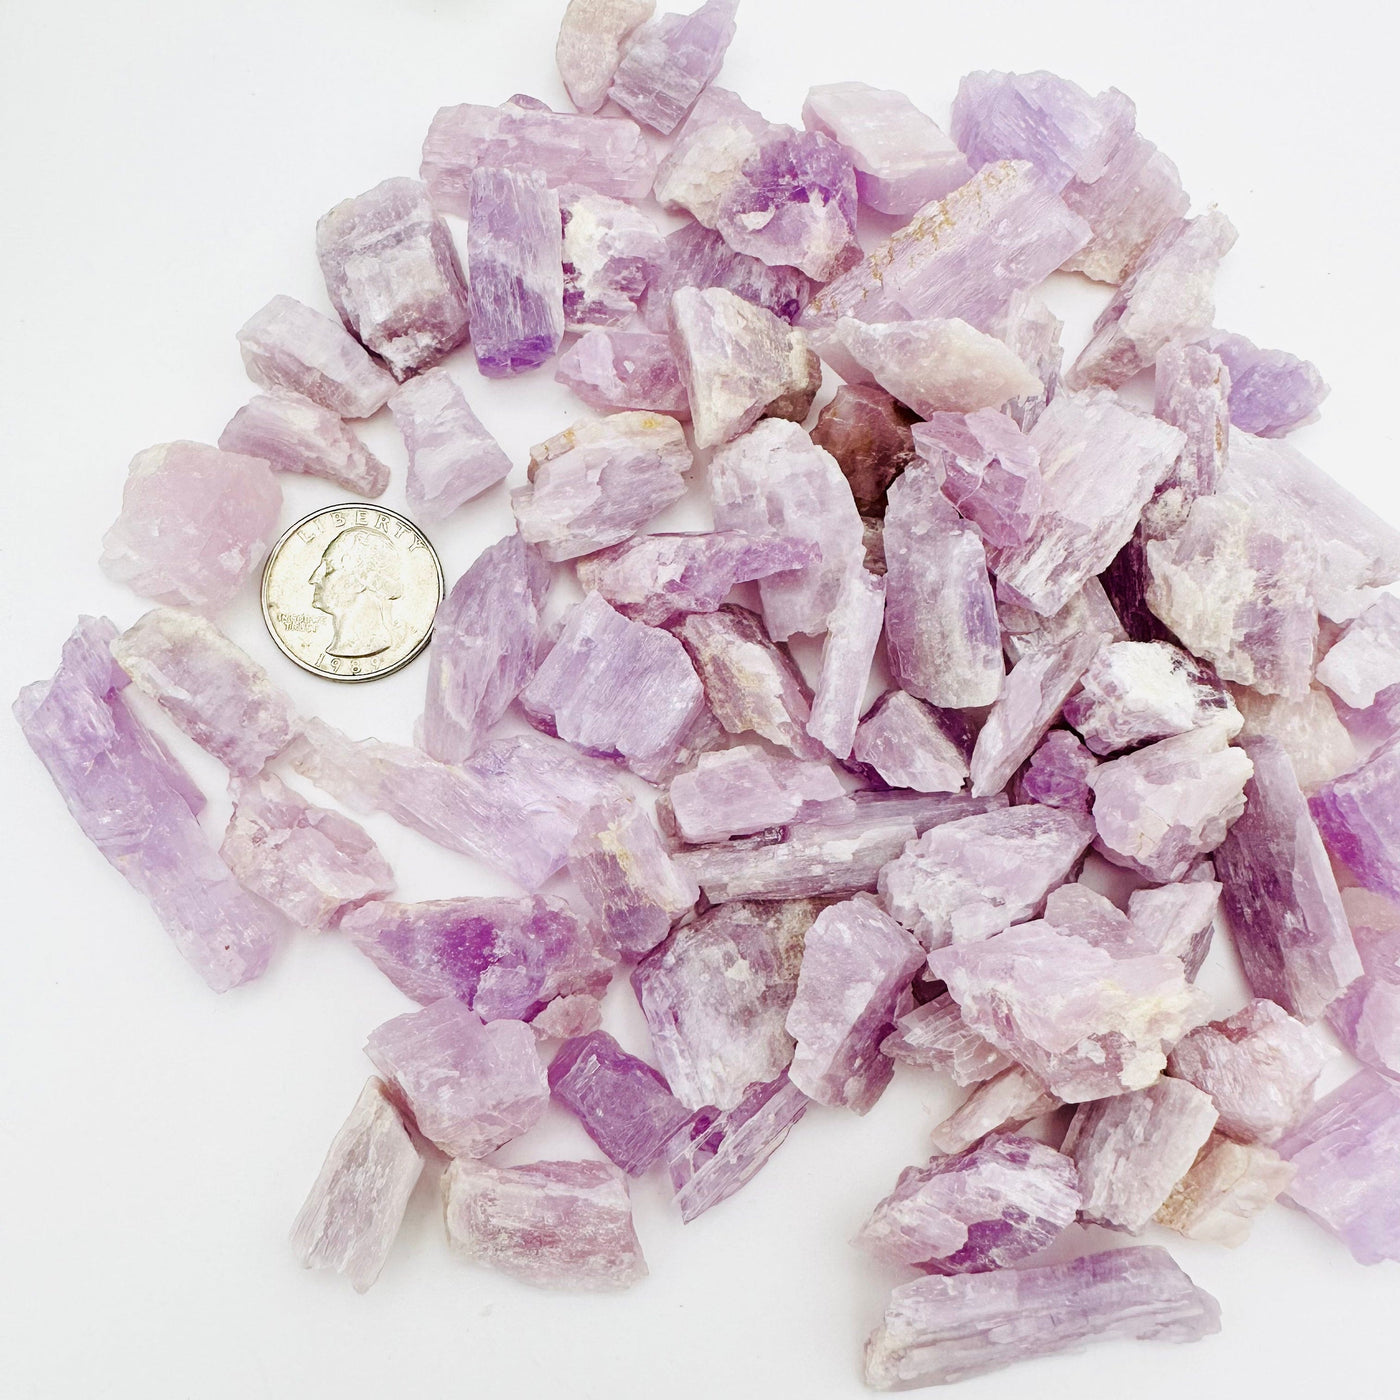 Raw Kunzite - YOU GET ALL - with quarter to show size reference 